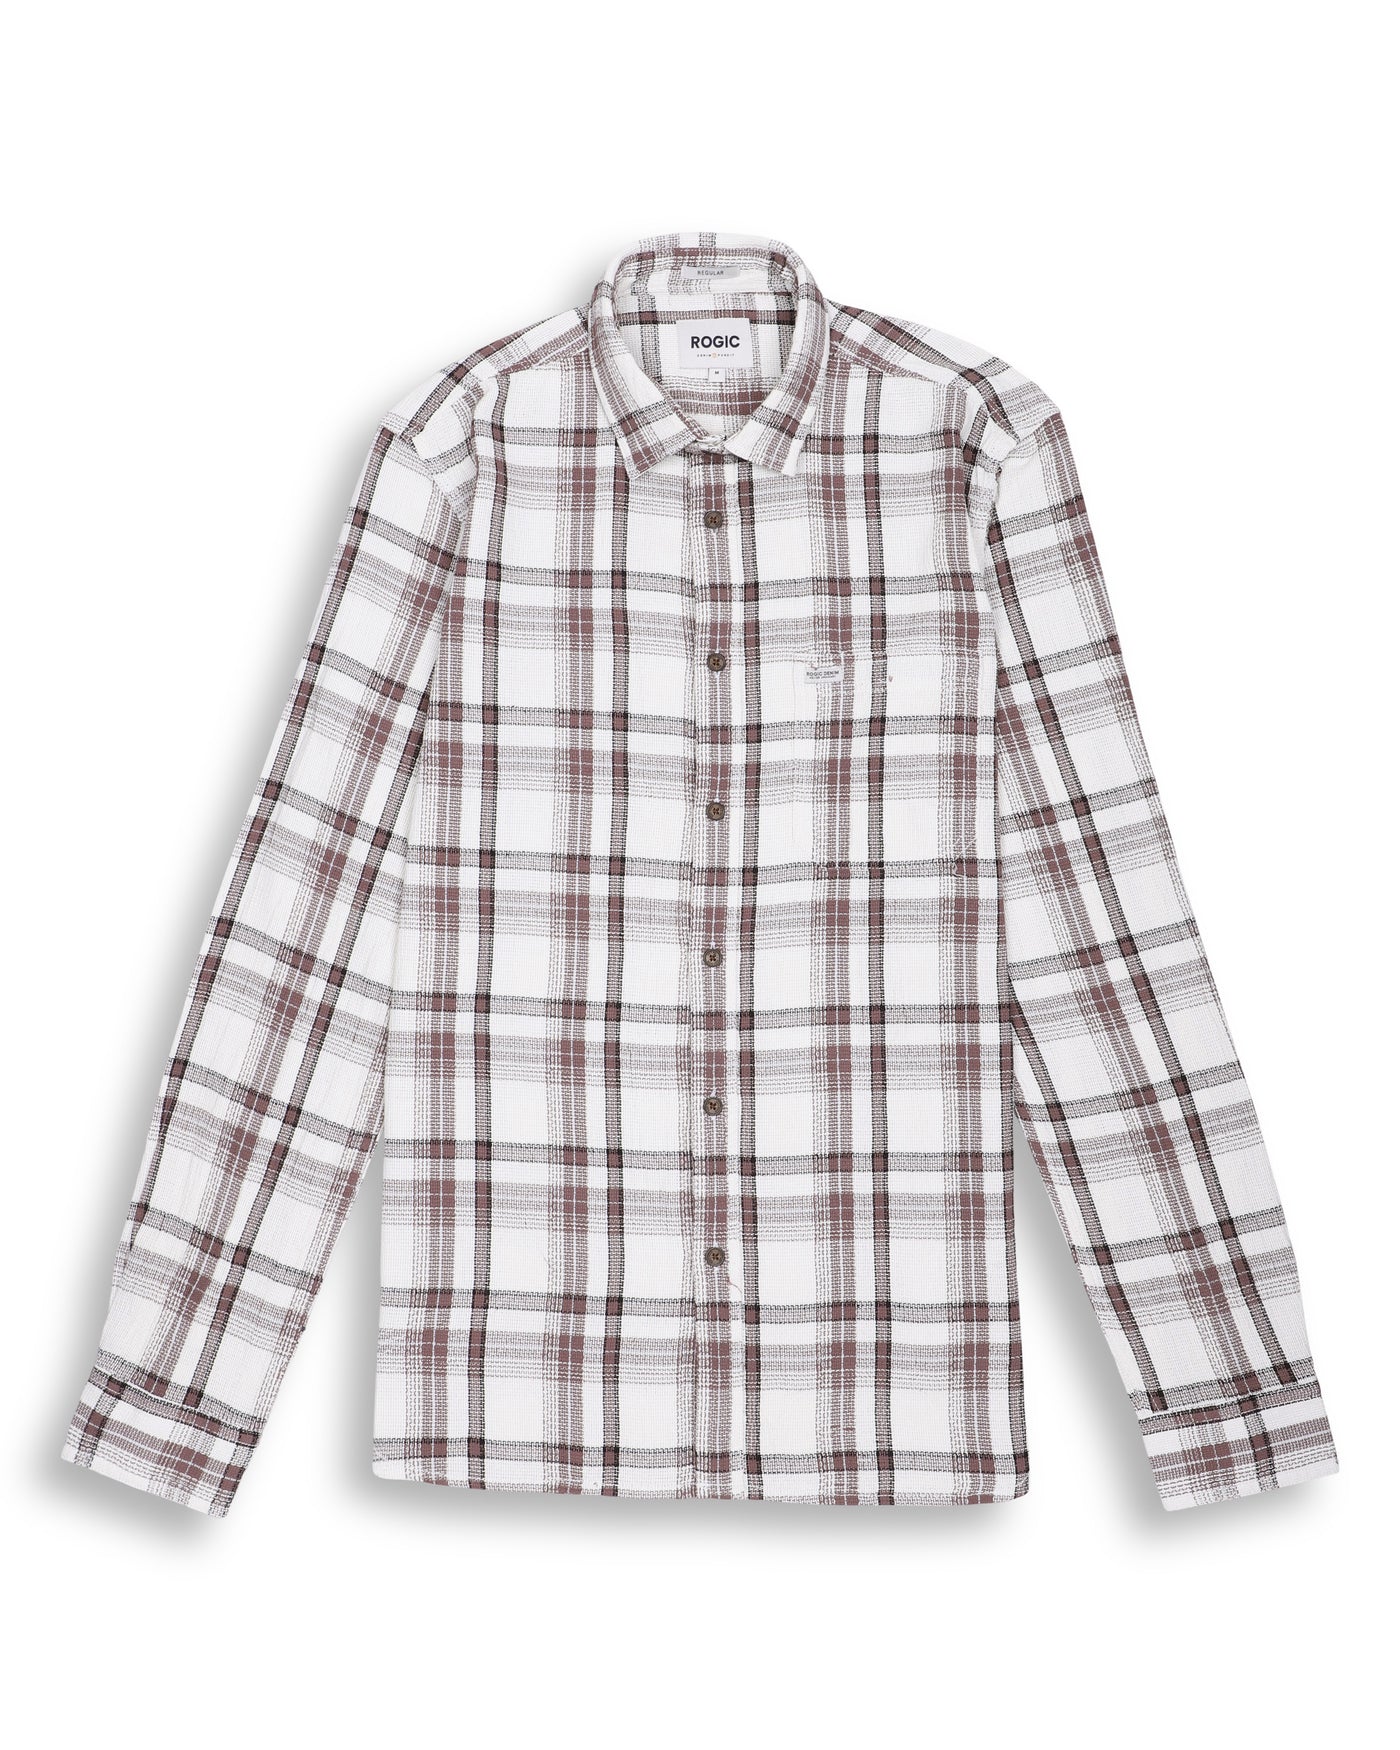 PLAIDS SHIRT IN RED